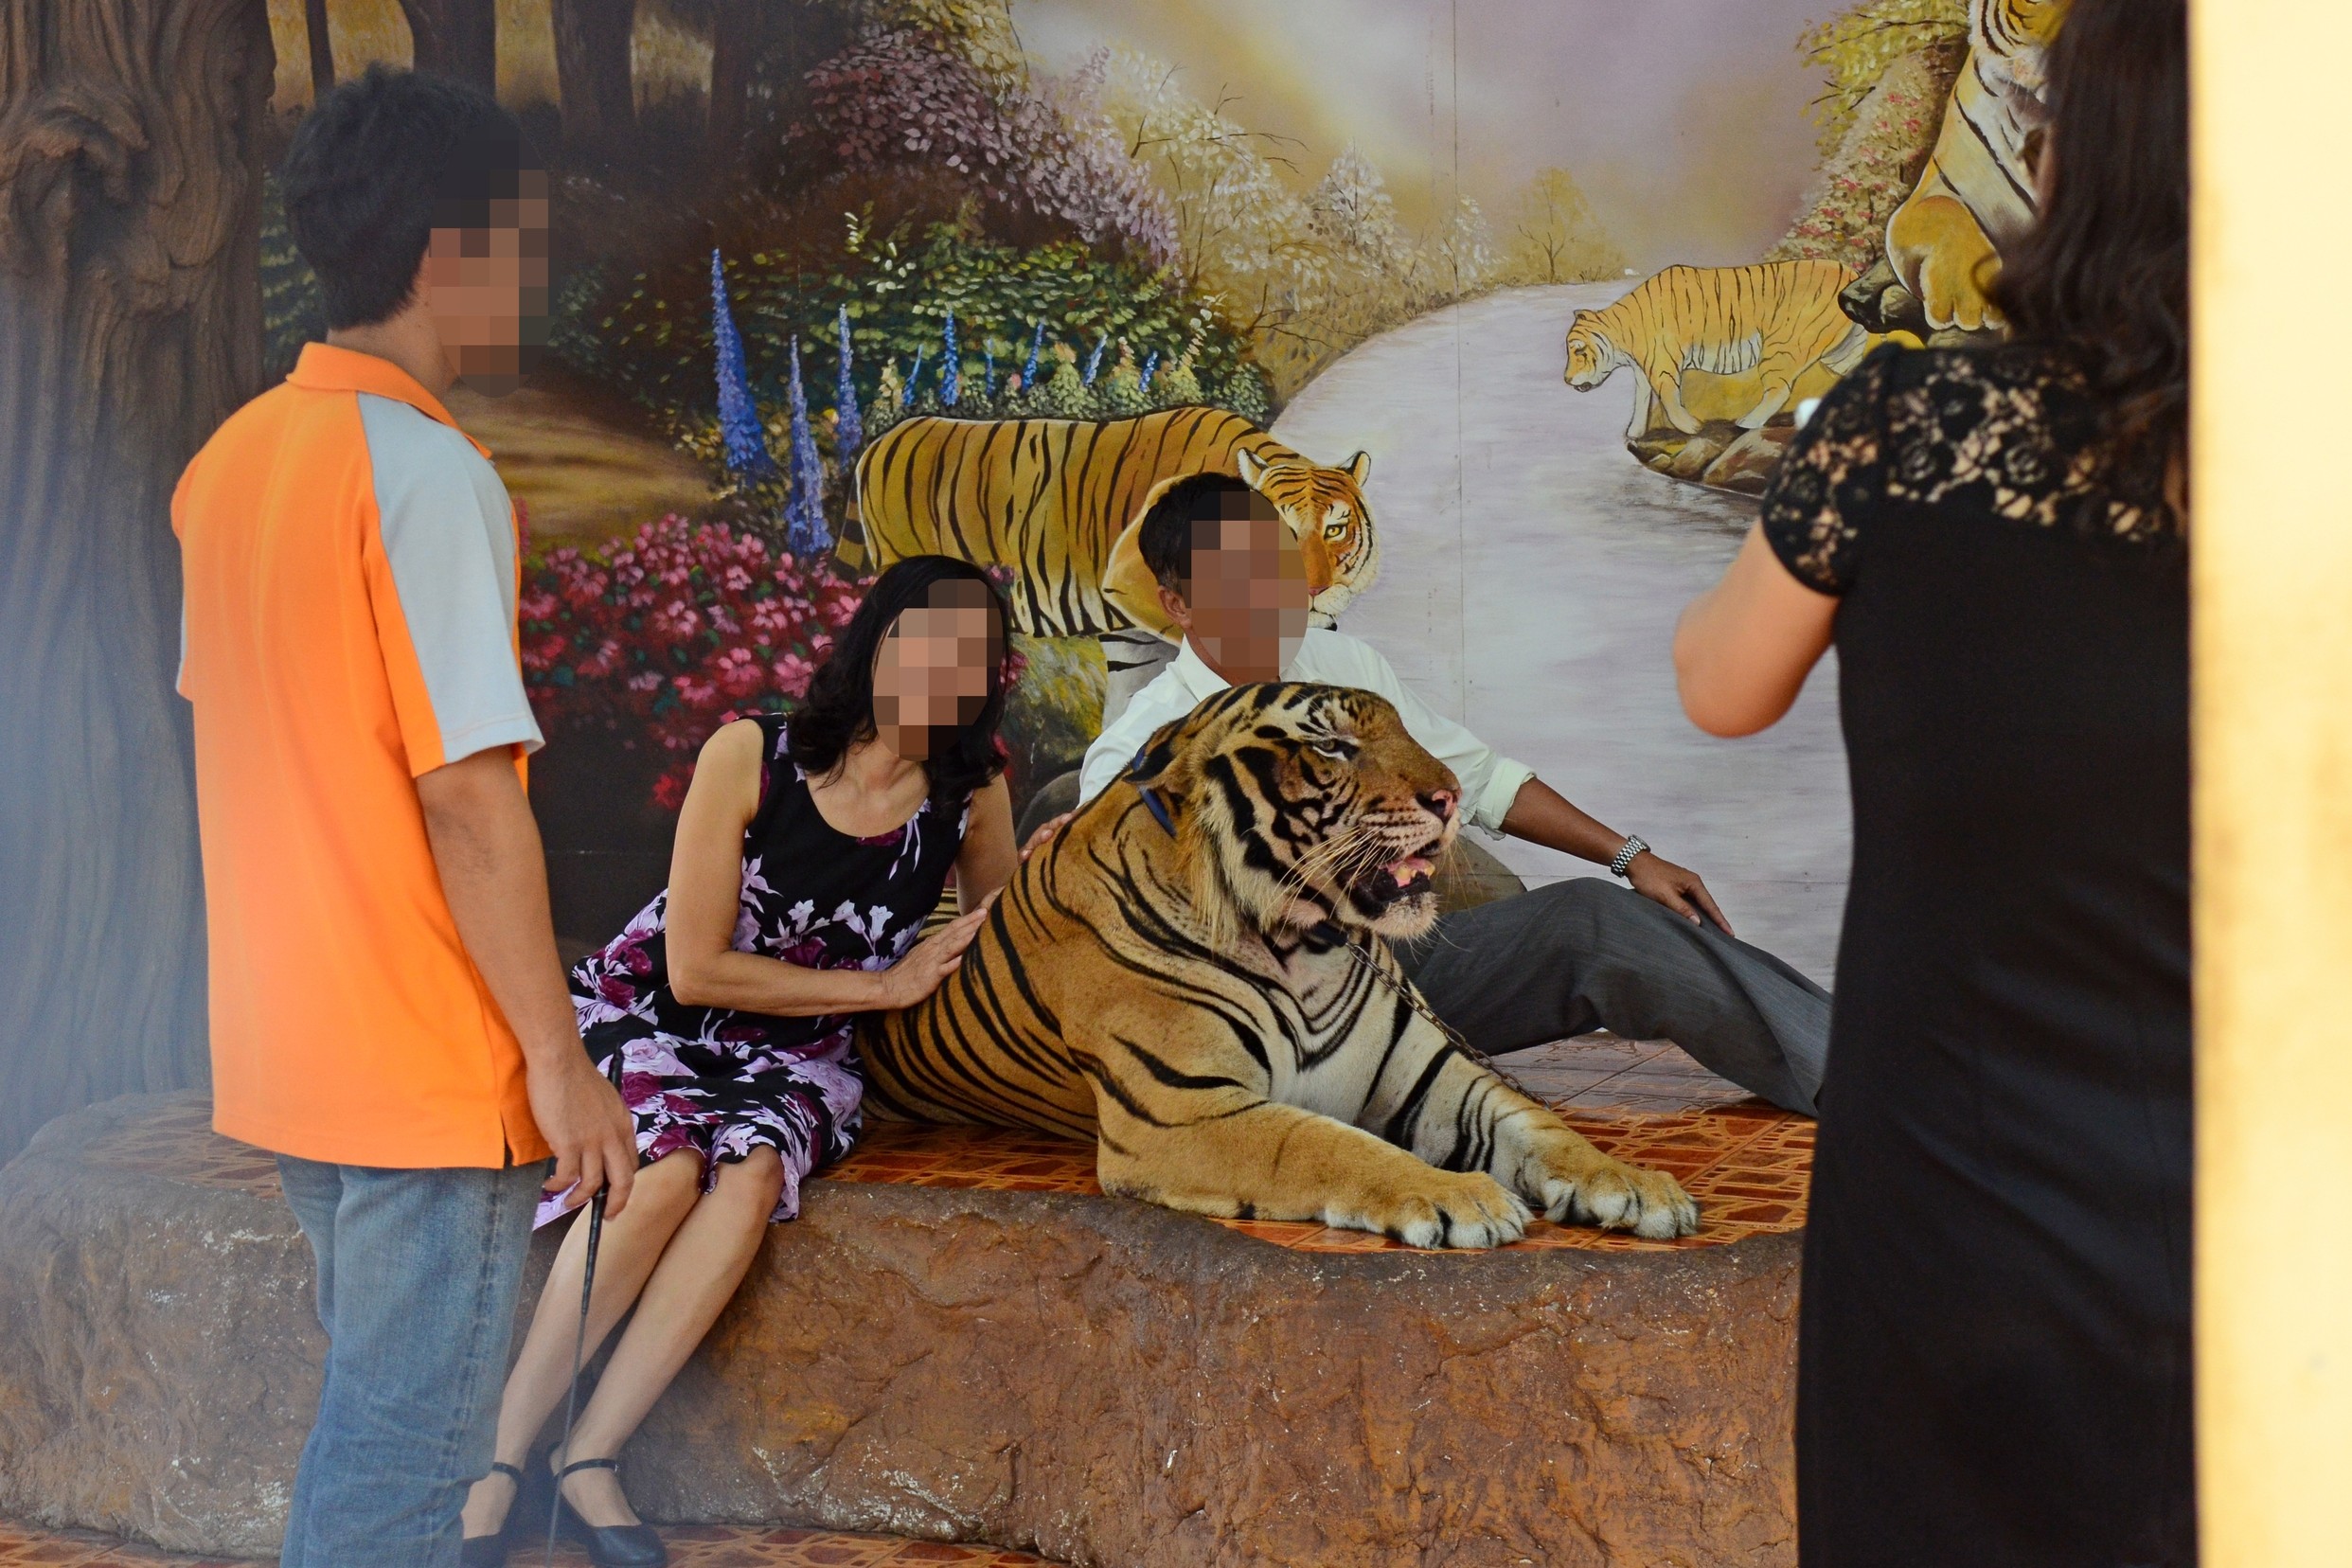 Tourists posing next to a tiger at a tiger entertainment attraction